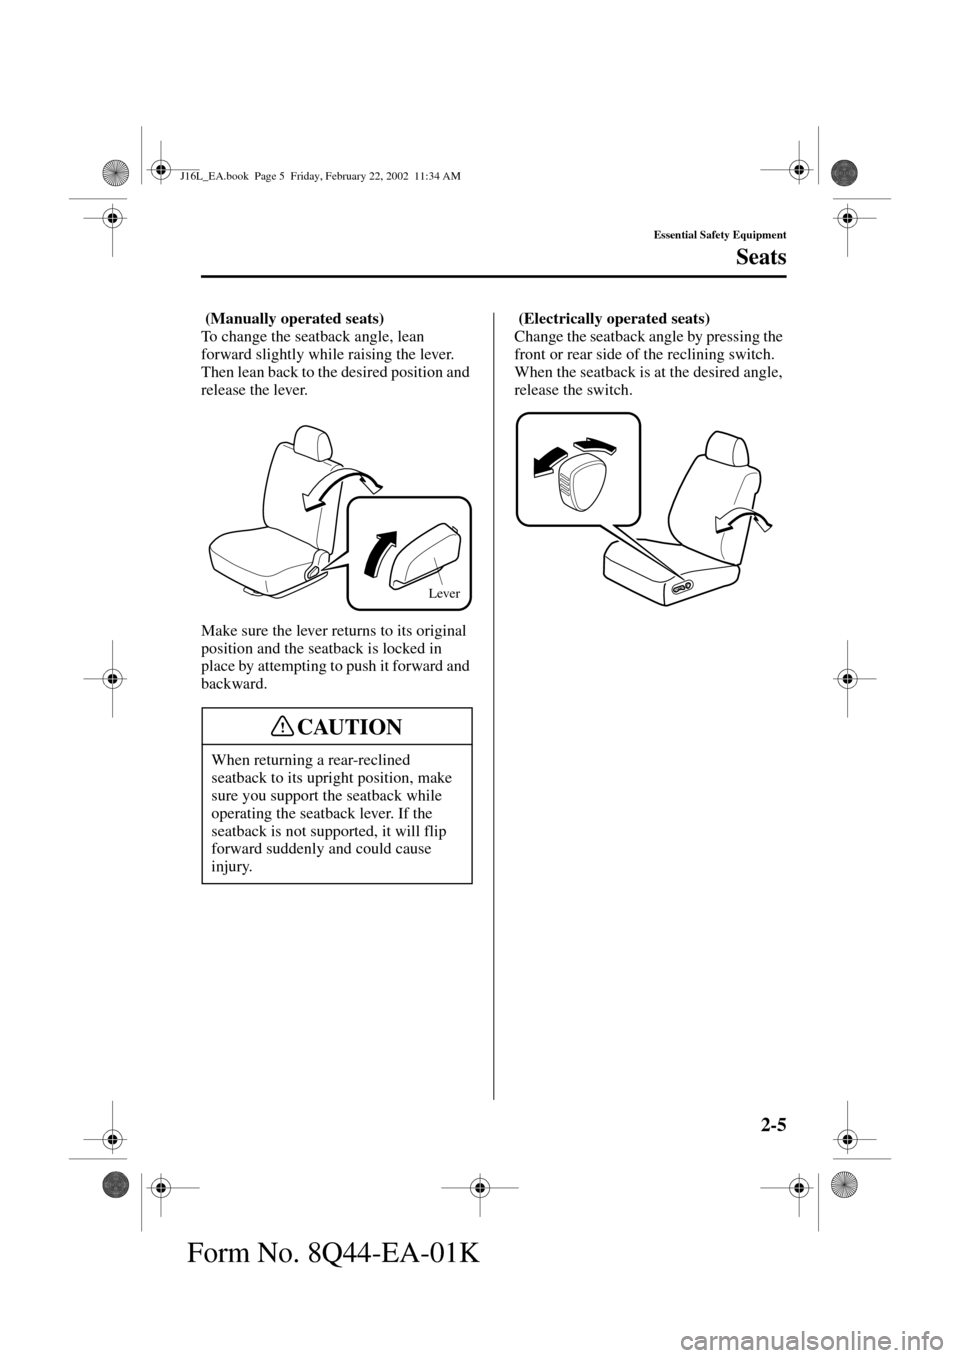 MAZDA MODEL MPV 2002  Owners Manual (in English) 2-5
Essential Safety Equipment
Seats
Form No. 8Q44-EA-01K
 (Manually operated seats)
To change the seatback angle, lean 
forward slightly while raising the lever. 
Then lean back to the desired positi